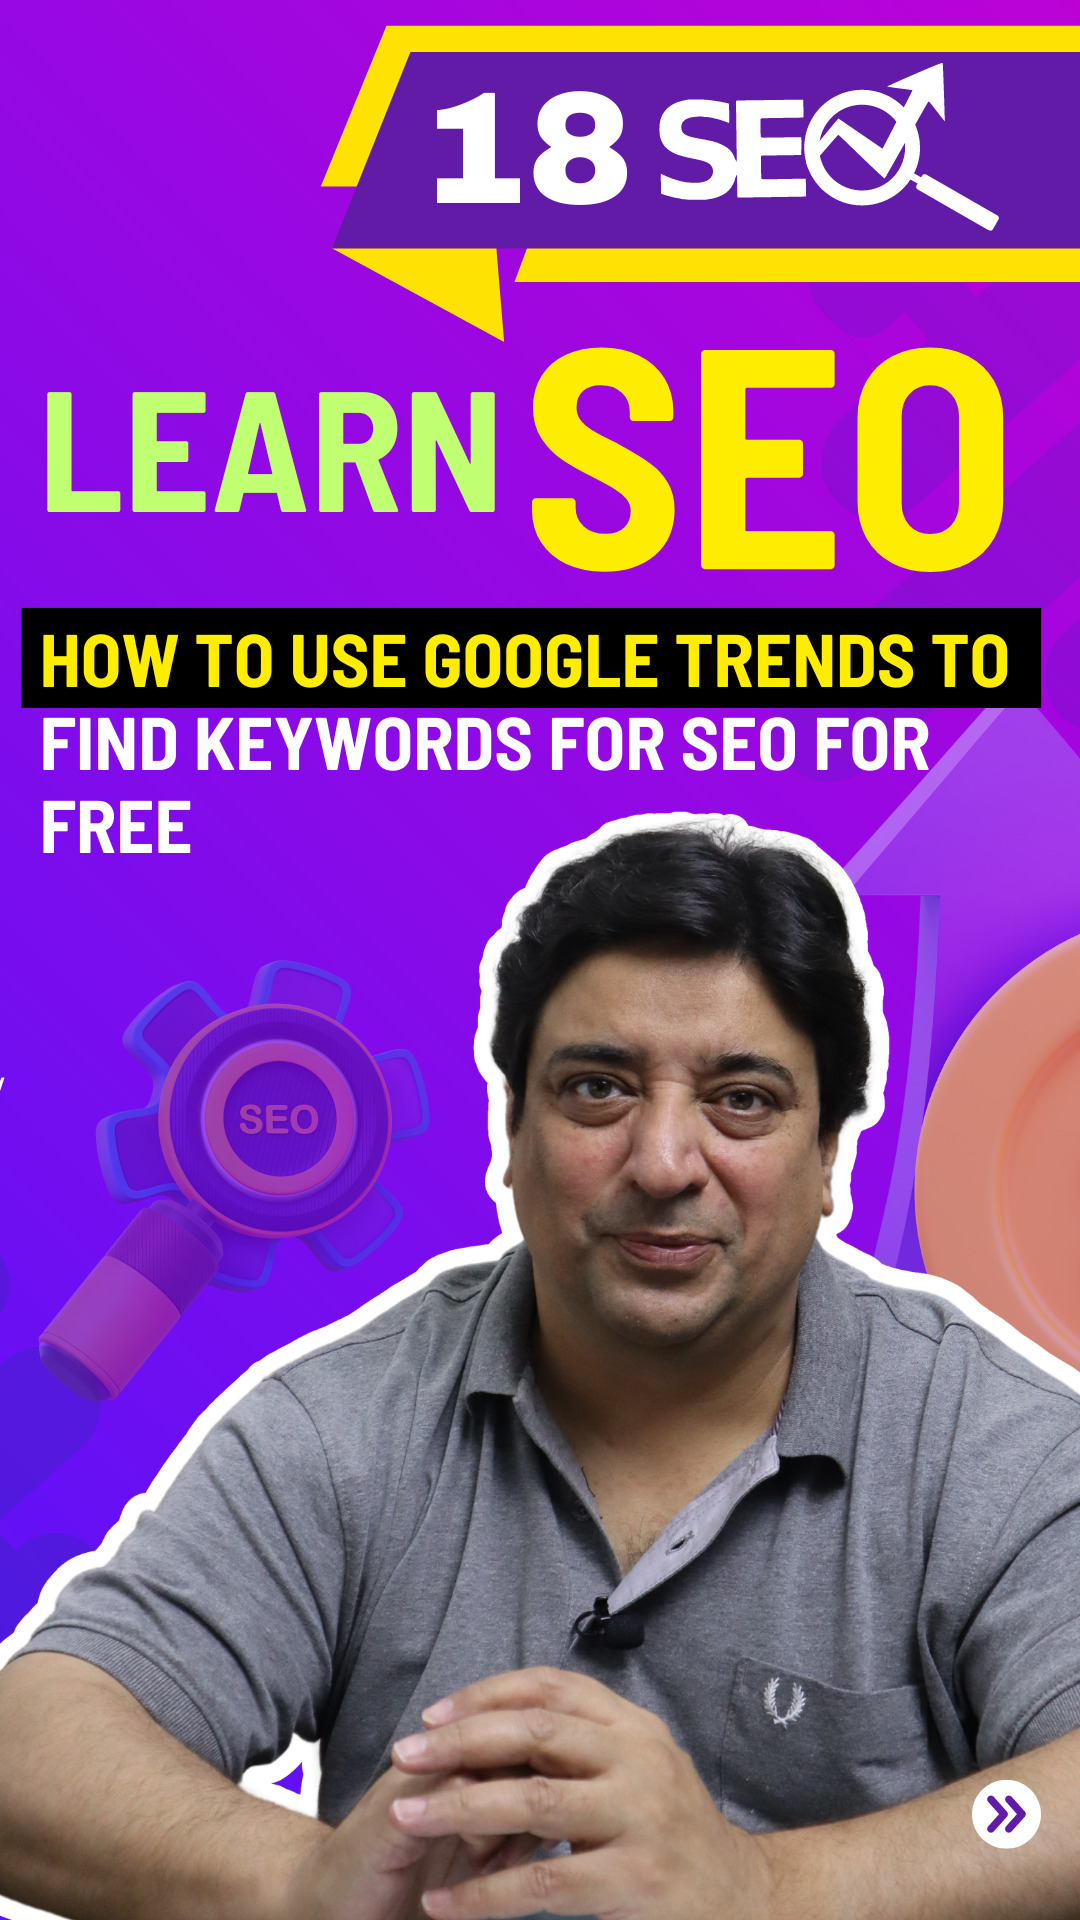 How to Use Google Trends to Find Best Keywords